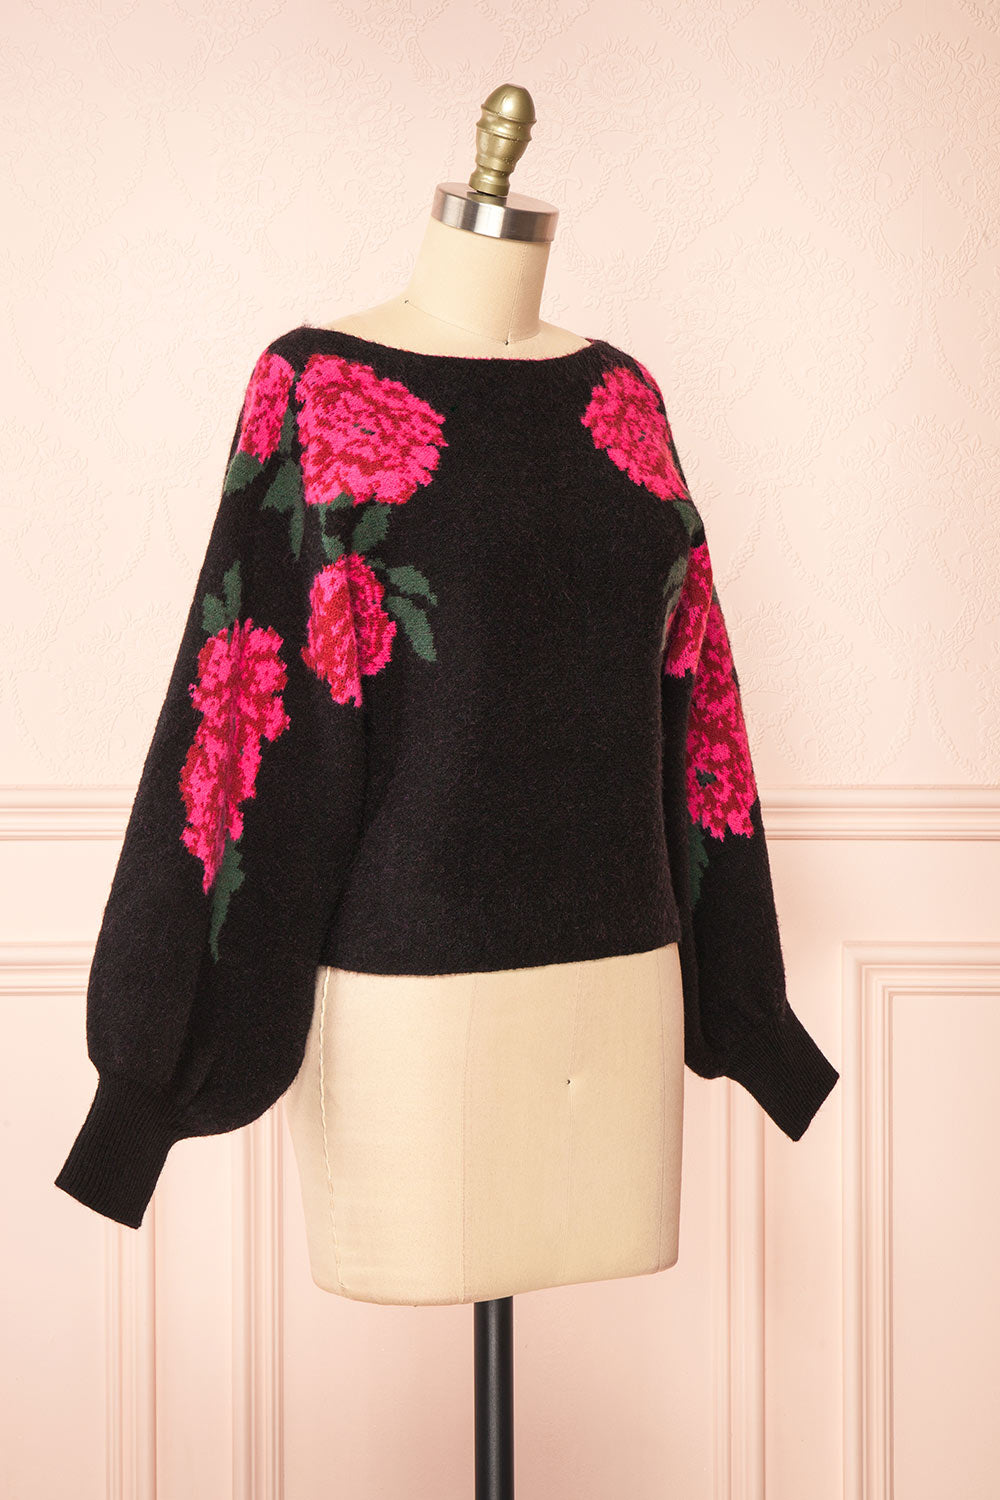 Hargeisa Black Knit Sweater w/ Boat Neckline | Boutique 1861 side view